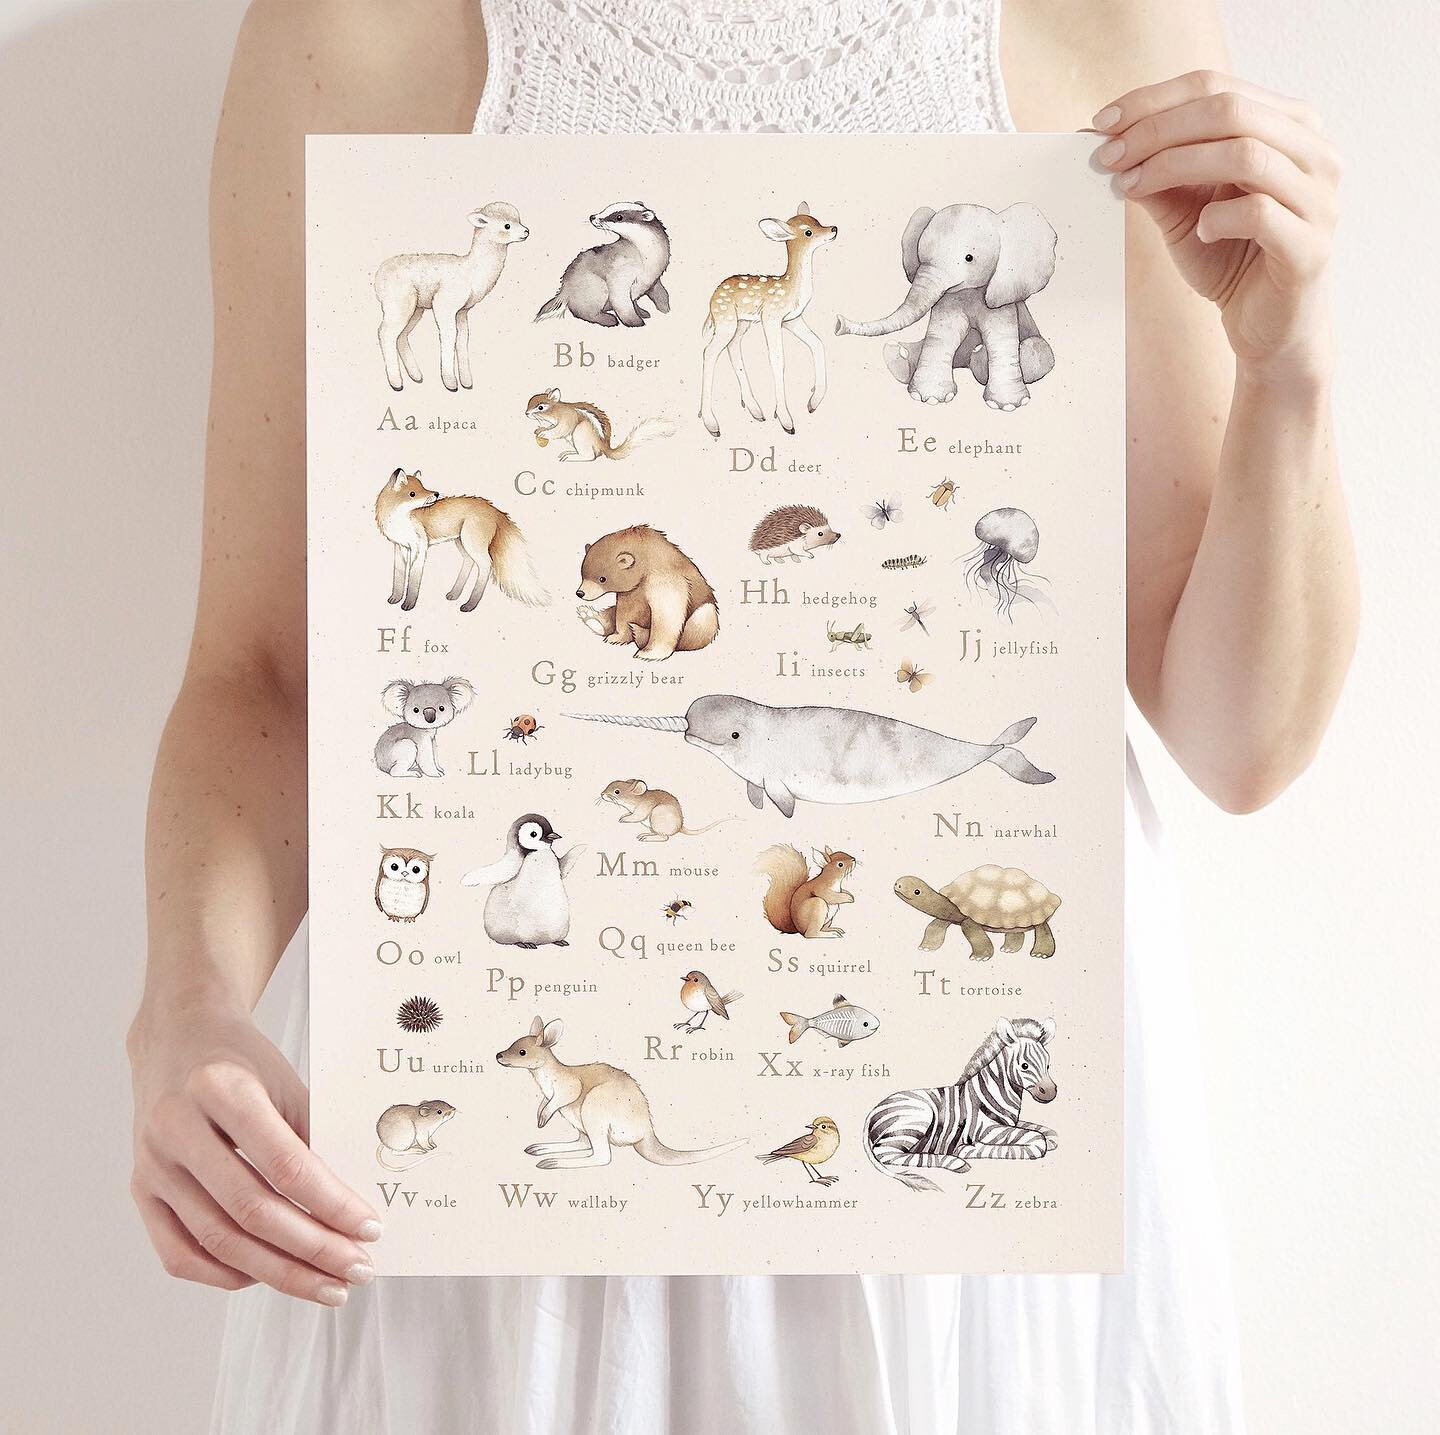 Released my Animal ABC print in English &amp; Slovene into the wild today! 🐻🤍 Other languages will be available later in the fall as I am working on them but there is a whole lot to paint 🍂 (plan is to make Italian, German, Spanish, French and Dut